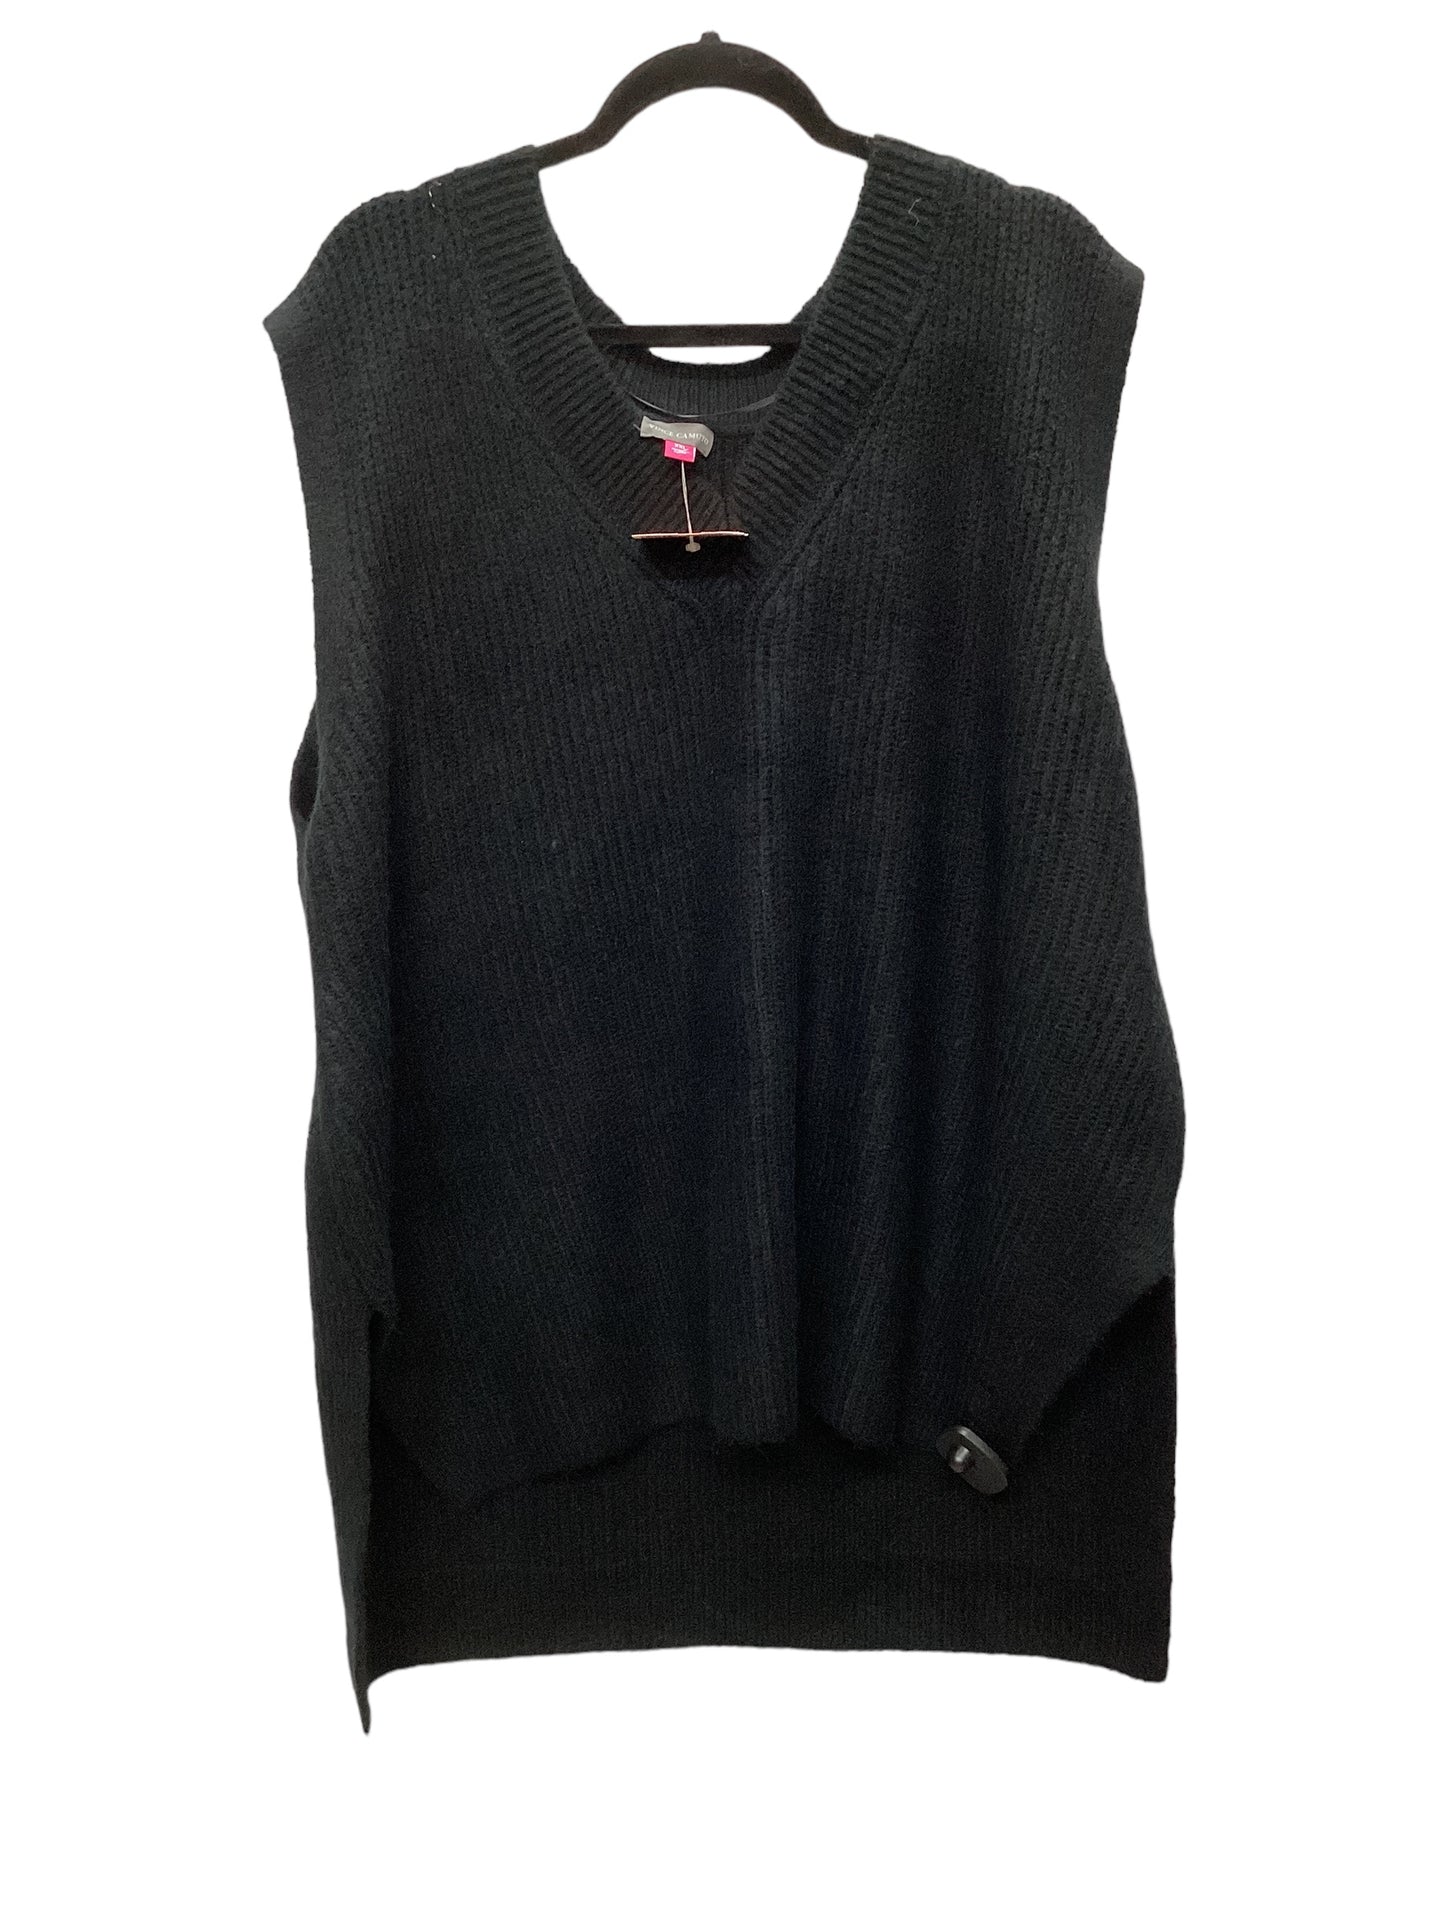 Vest Sweater By Vince Camuto  Size: 2x